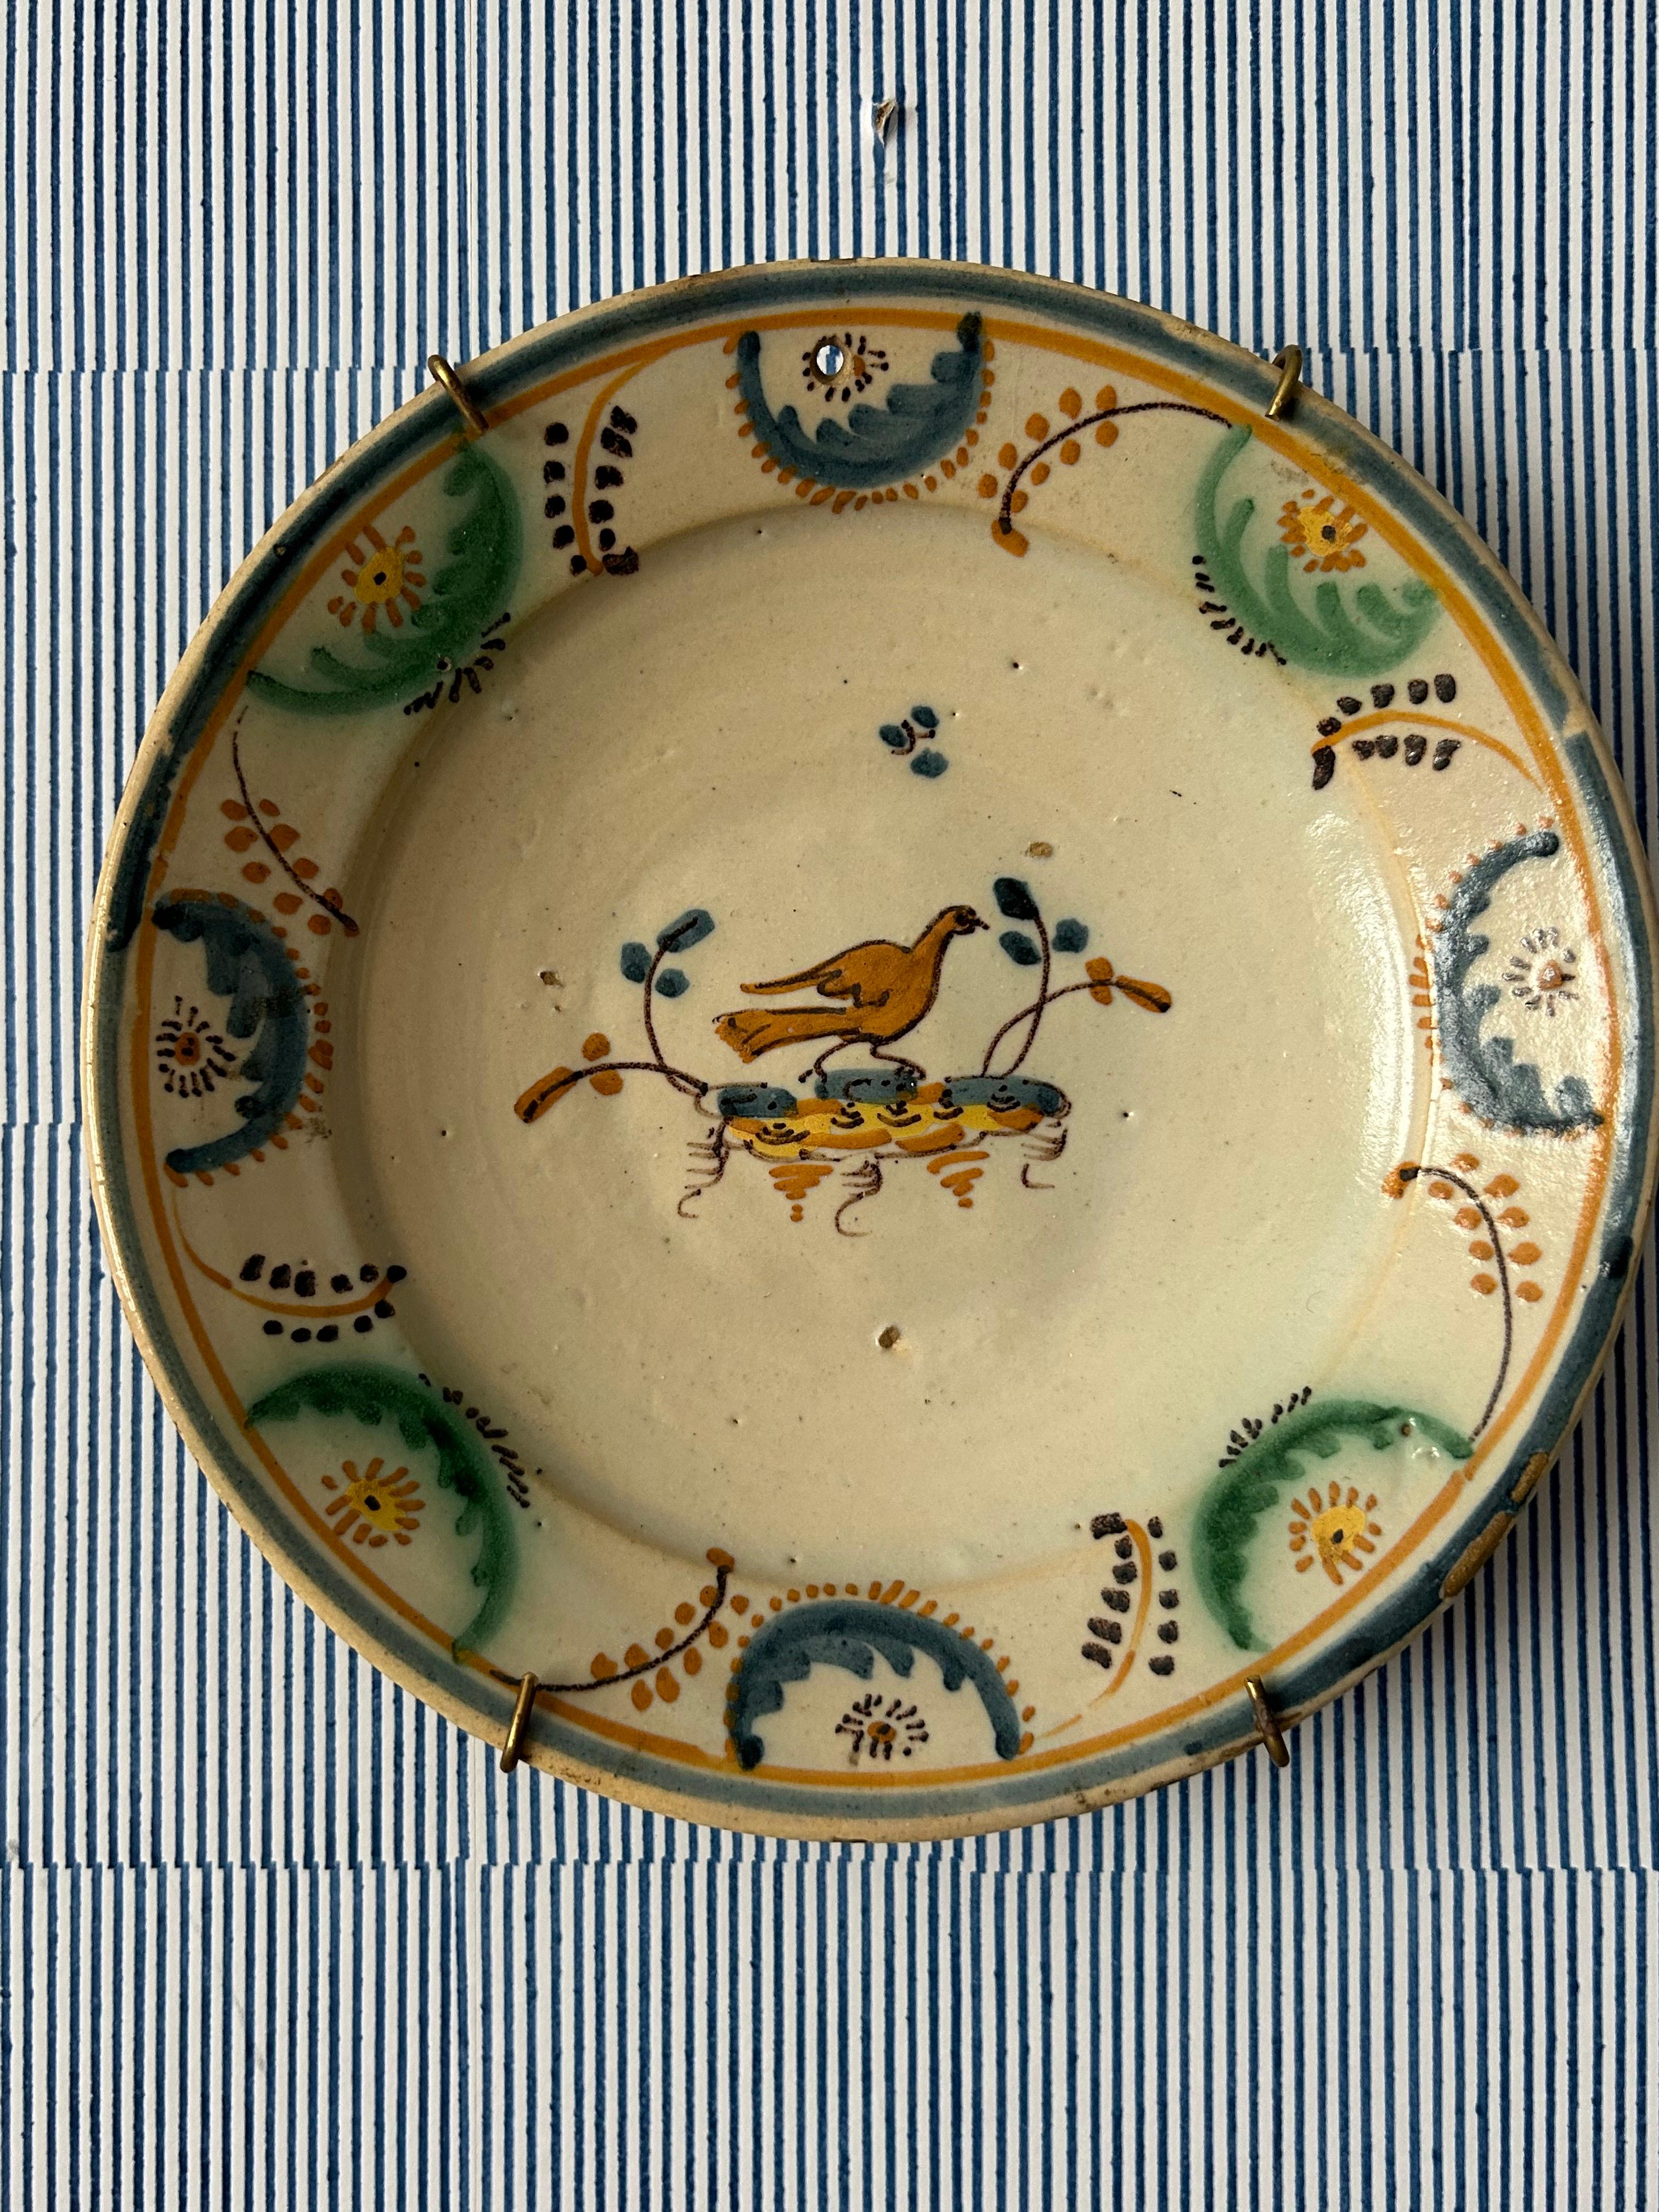 Glazed Antique Ceramic Hanging Platter with Decorations, Portugal, Late 19th Century For Sale